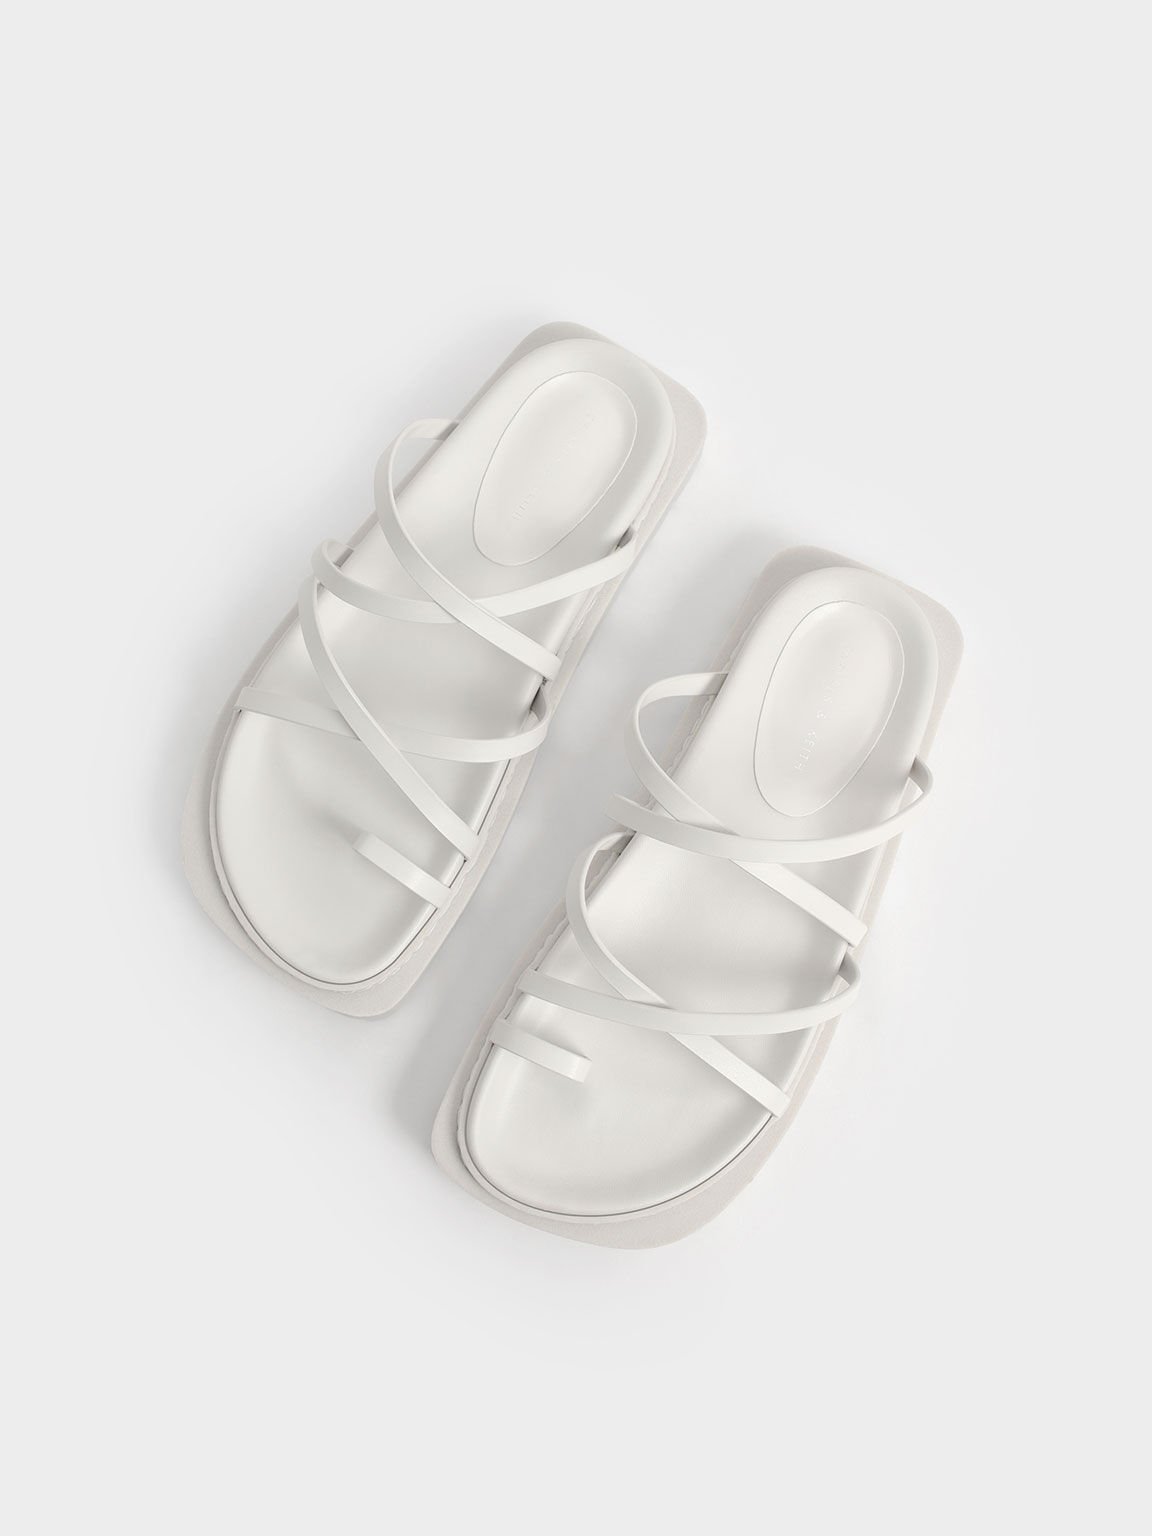 Strappy Cleated Sole Sandals, White, hi-res